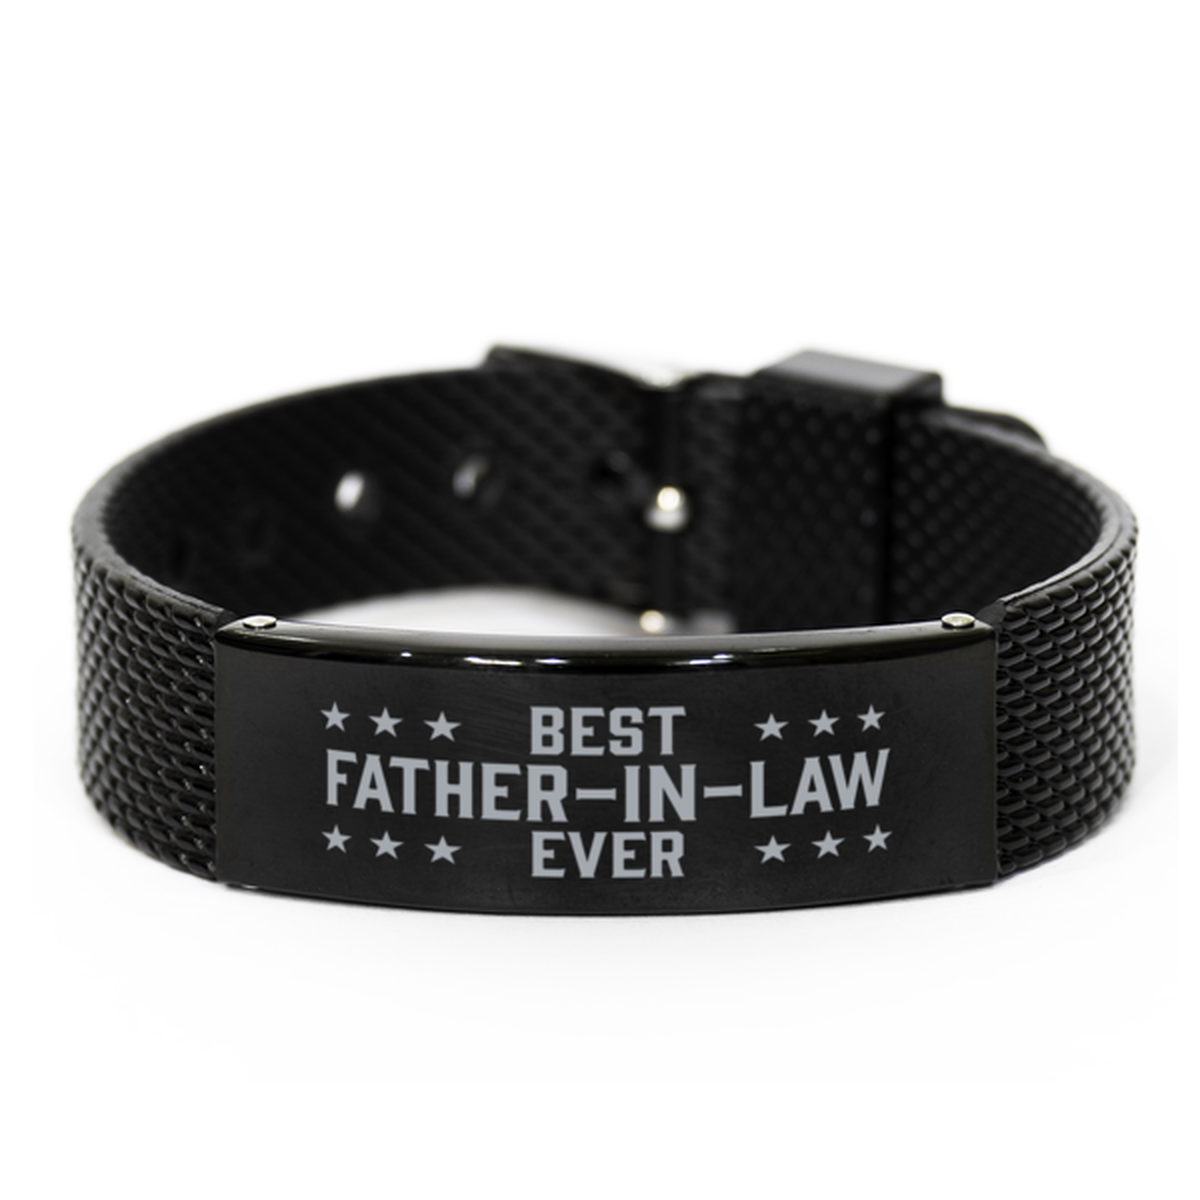 Best Father-in-law Ever Father-in-law Gifts, Gag Engraved Bracelet For Father-in-law, Best Family Gifts For Men